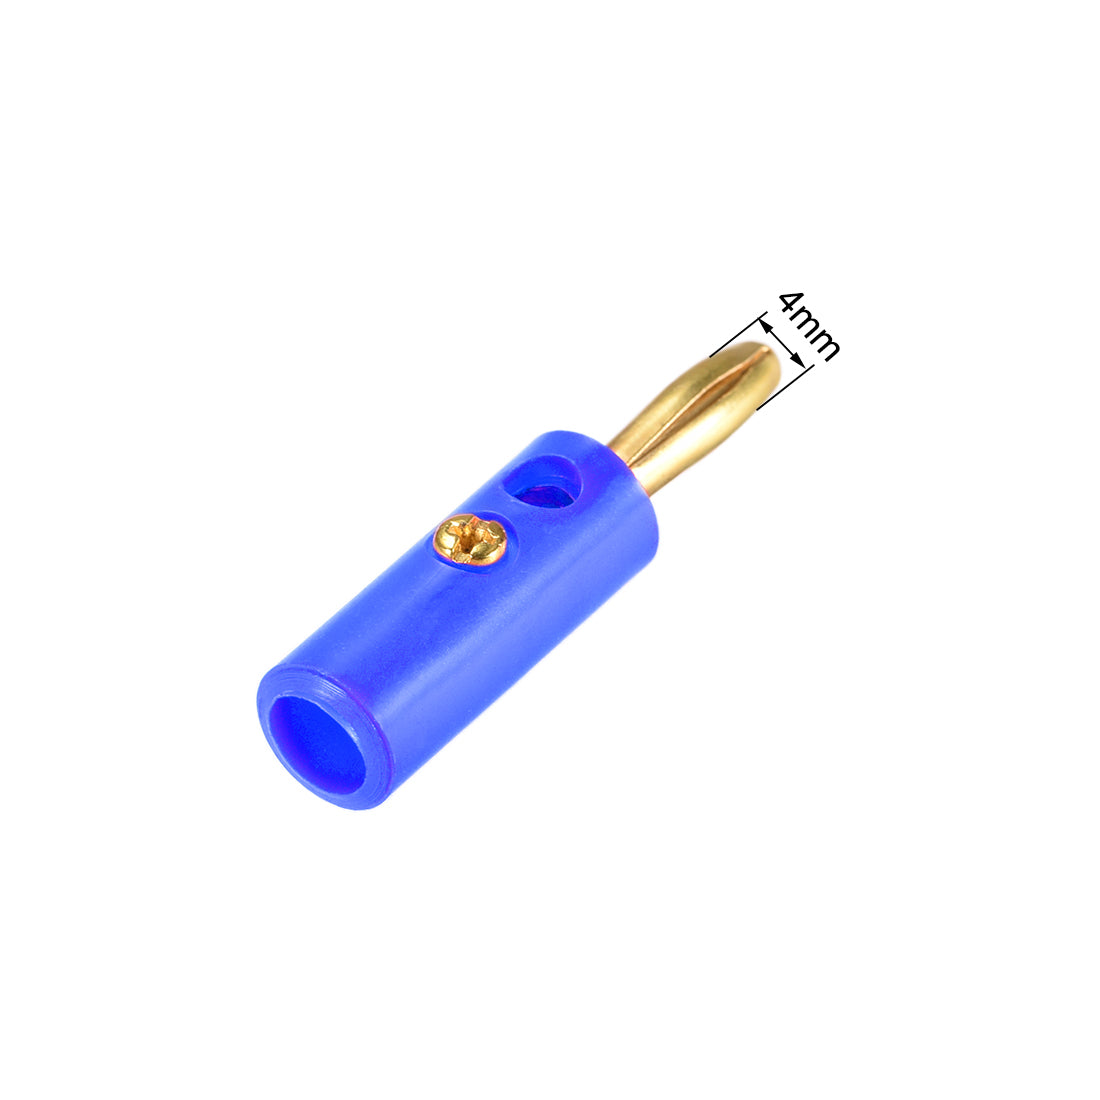 uxcell Uxcell 4mm Banana Speaker Wire Cable Screw Plugs Connectors Gold Blue 5pcs Jack Connector